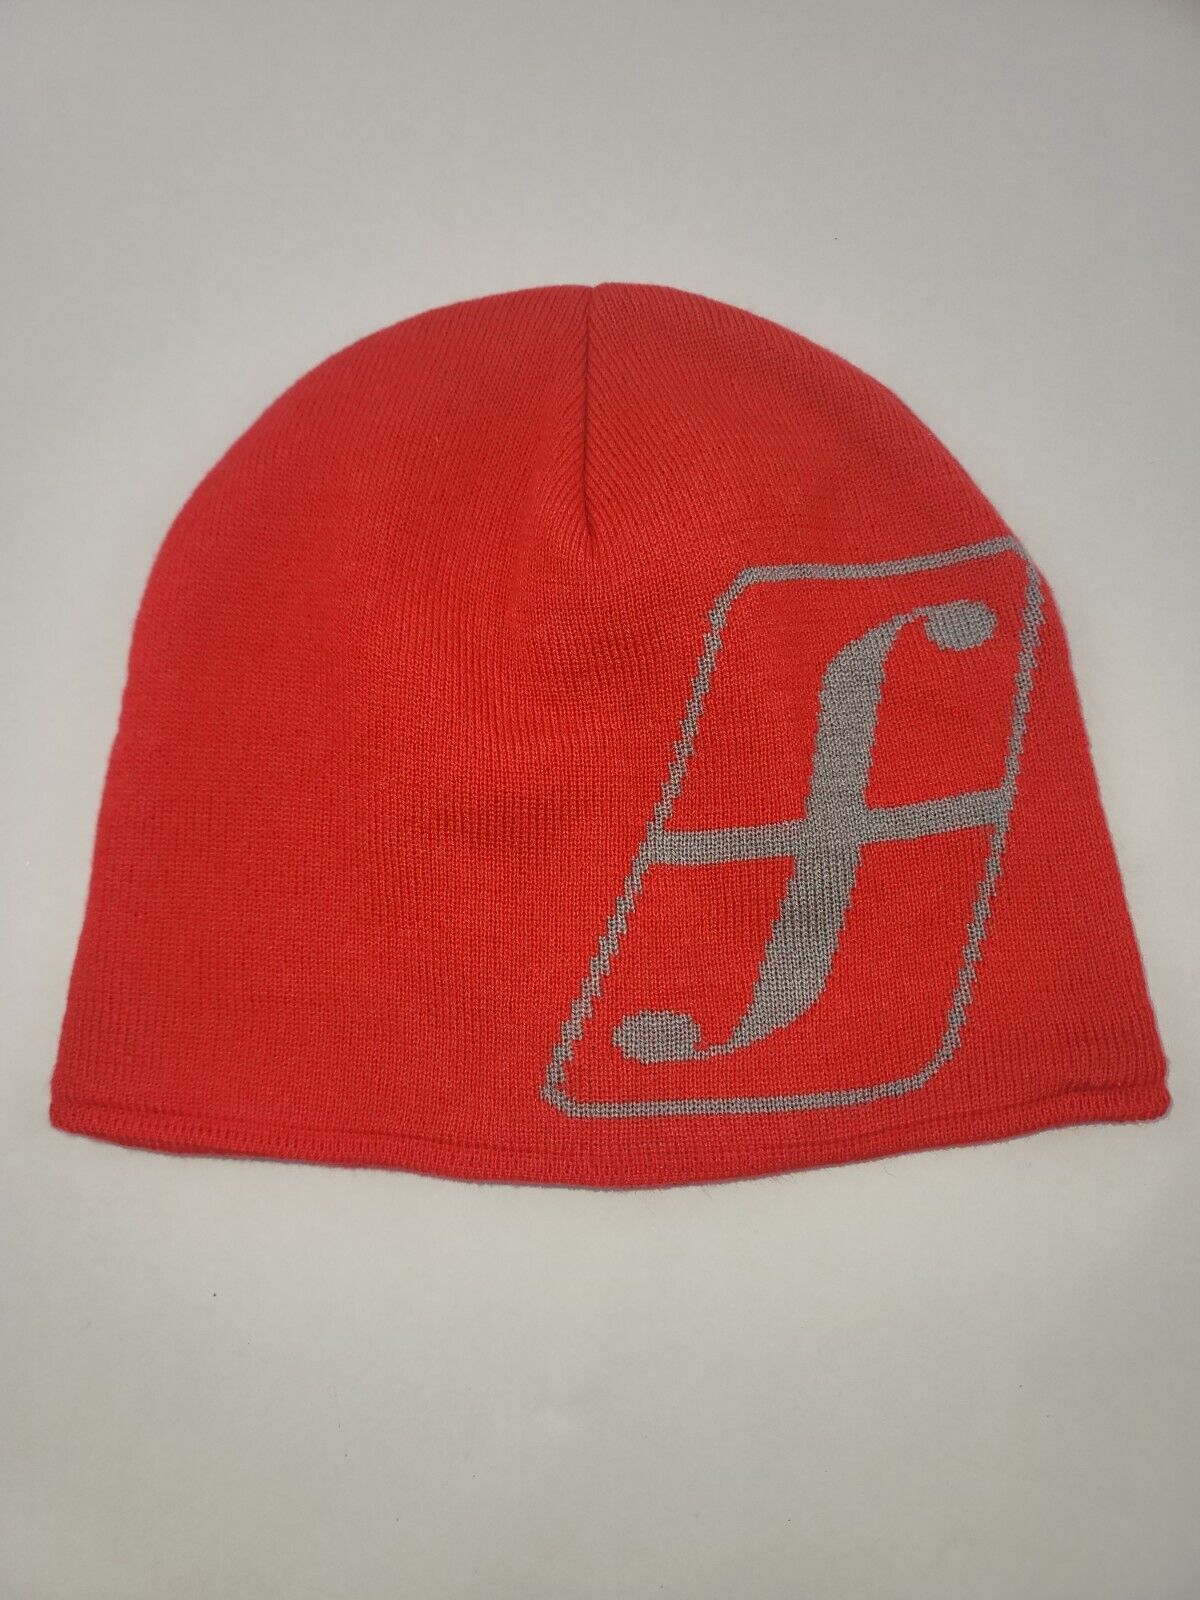 Forum Bennie Toque Red Hat Like New One Size Fit All